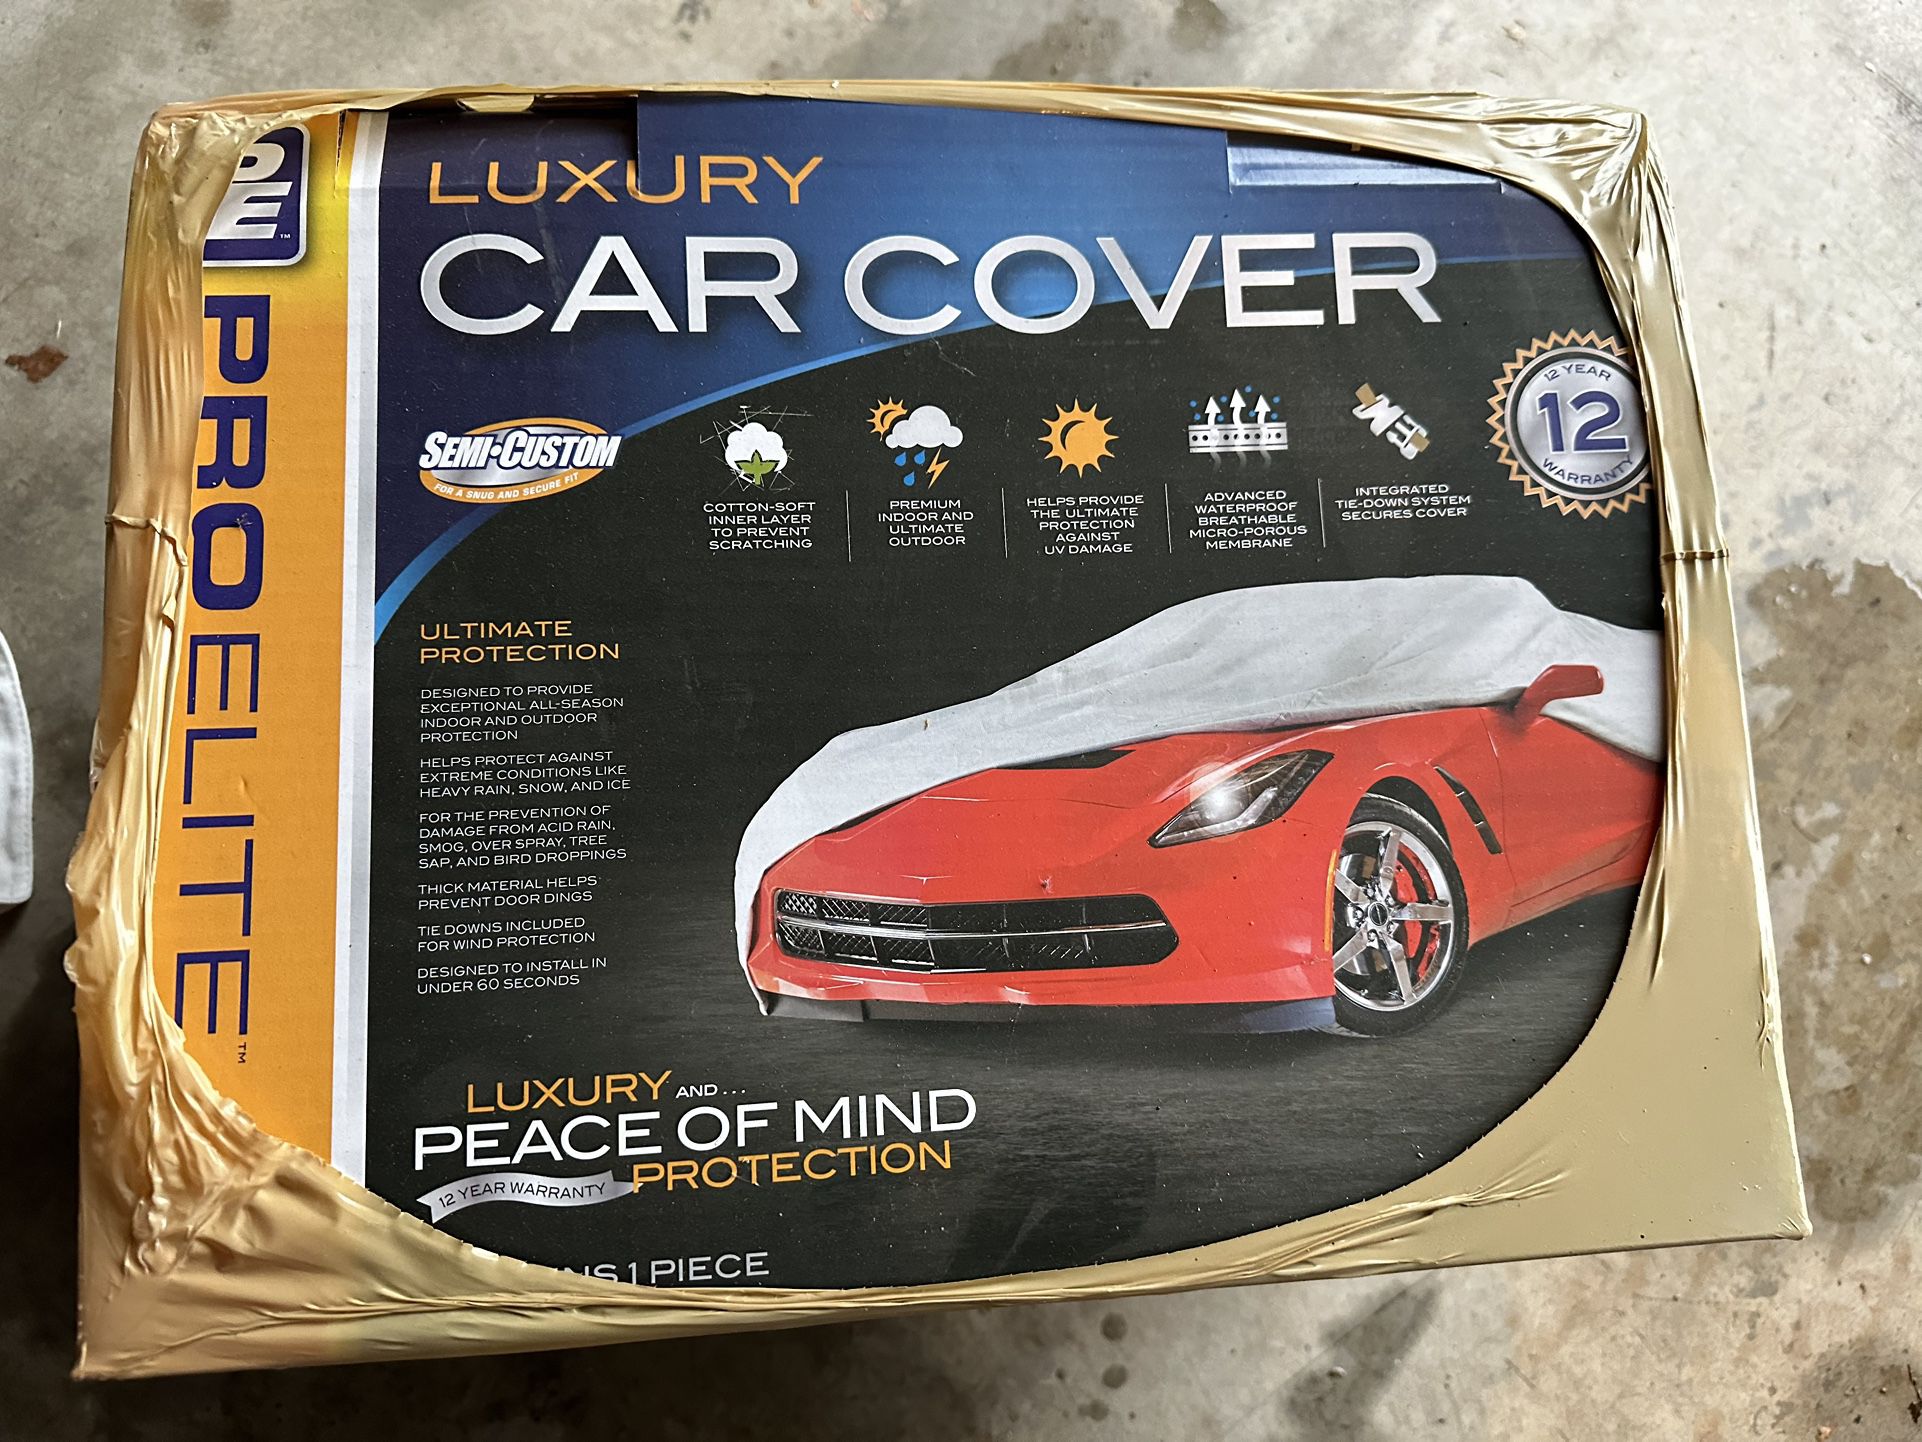 Outdoor All-weather Car Cover, Size 3